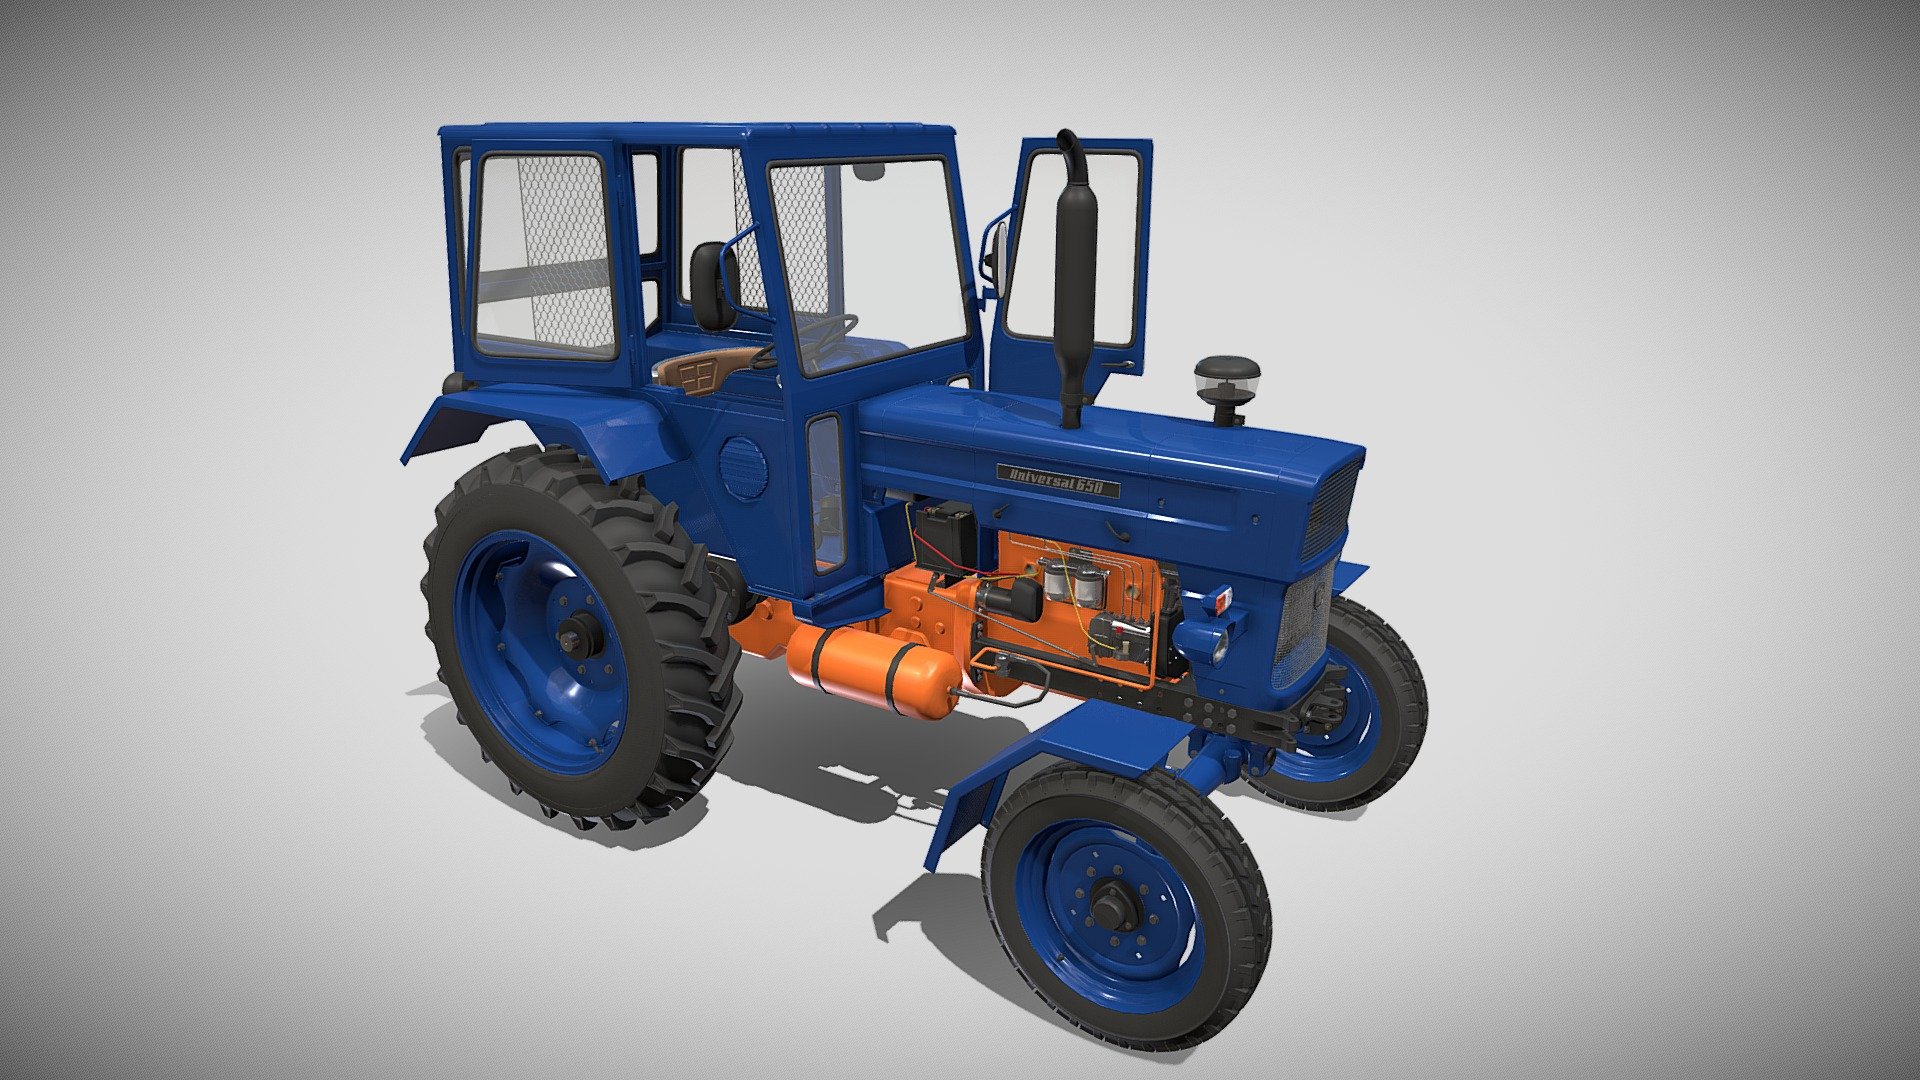 Highly detailed Tractor 3d model rendered with Cycles in Blender, as per seen on attached images.

The model is very intricately built, it has the transmission and engine, with cooling for oil and water, injection pump, fuel lines, compressed air circuit, electric circuit modeled. Some of these elements cannot be seen on the main renders, so I have also rendered the chassis in order to showcase them.

The 3d model is scaled to original size in Blender.

File formats:

-.blend, rendered with cycles, as seen in the images;

-.blend, rendered with cycles, as seen in the images, with doors open;

-.obj, with materials applied;

-.obj, with materials applied, with doors open;

-.dae, with materials applied;

-.dae, with materials applied, with doors open;

-.fbx, with materials applied;

-.fbx, with materials applied, with doors open;

-.stl;

-.stl, with doors open;

Files come named appropriately and split by file format 3d model